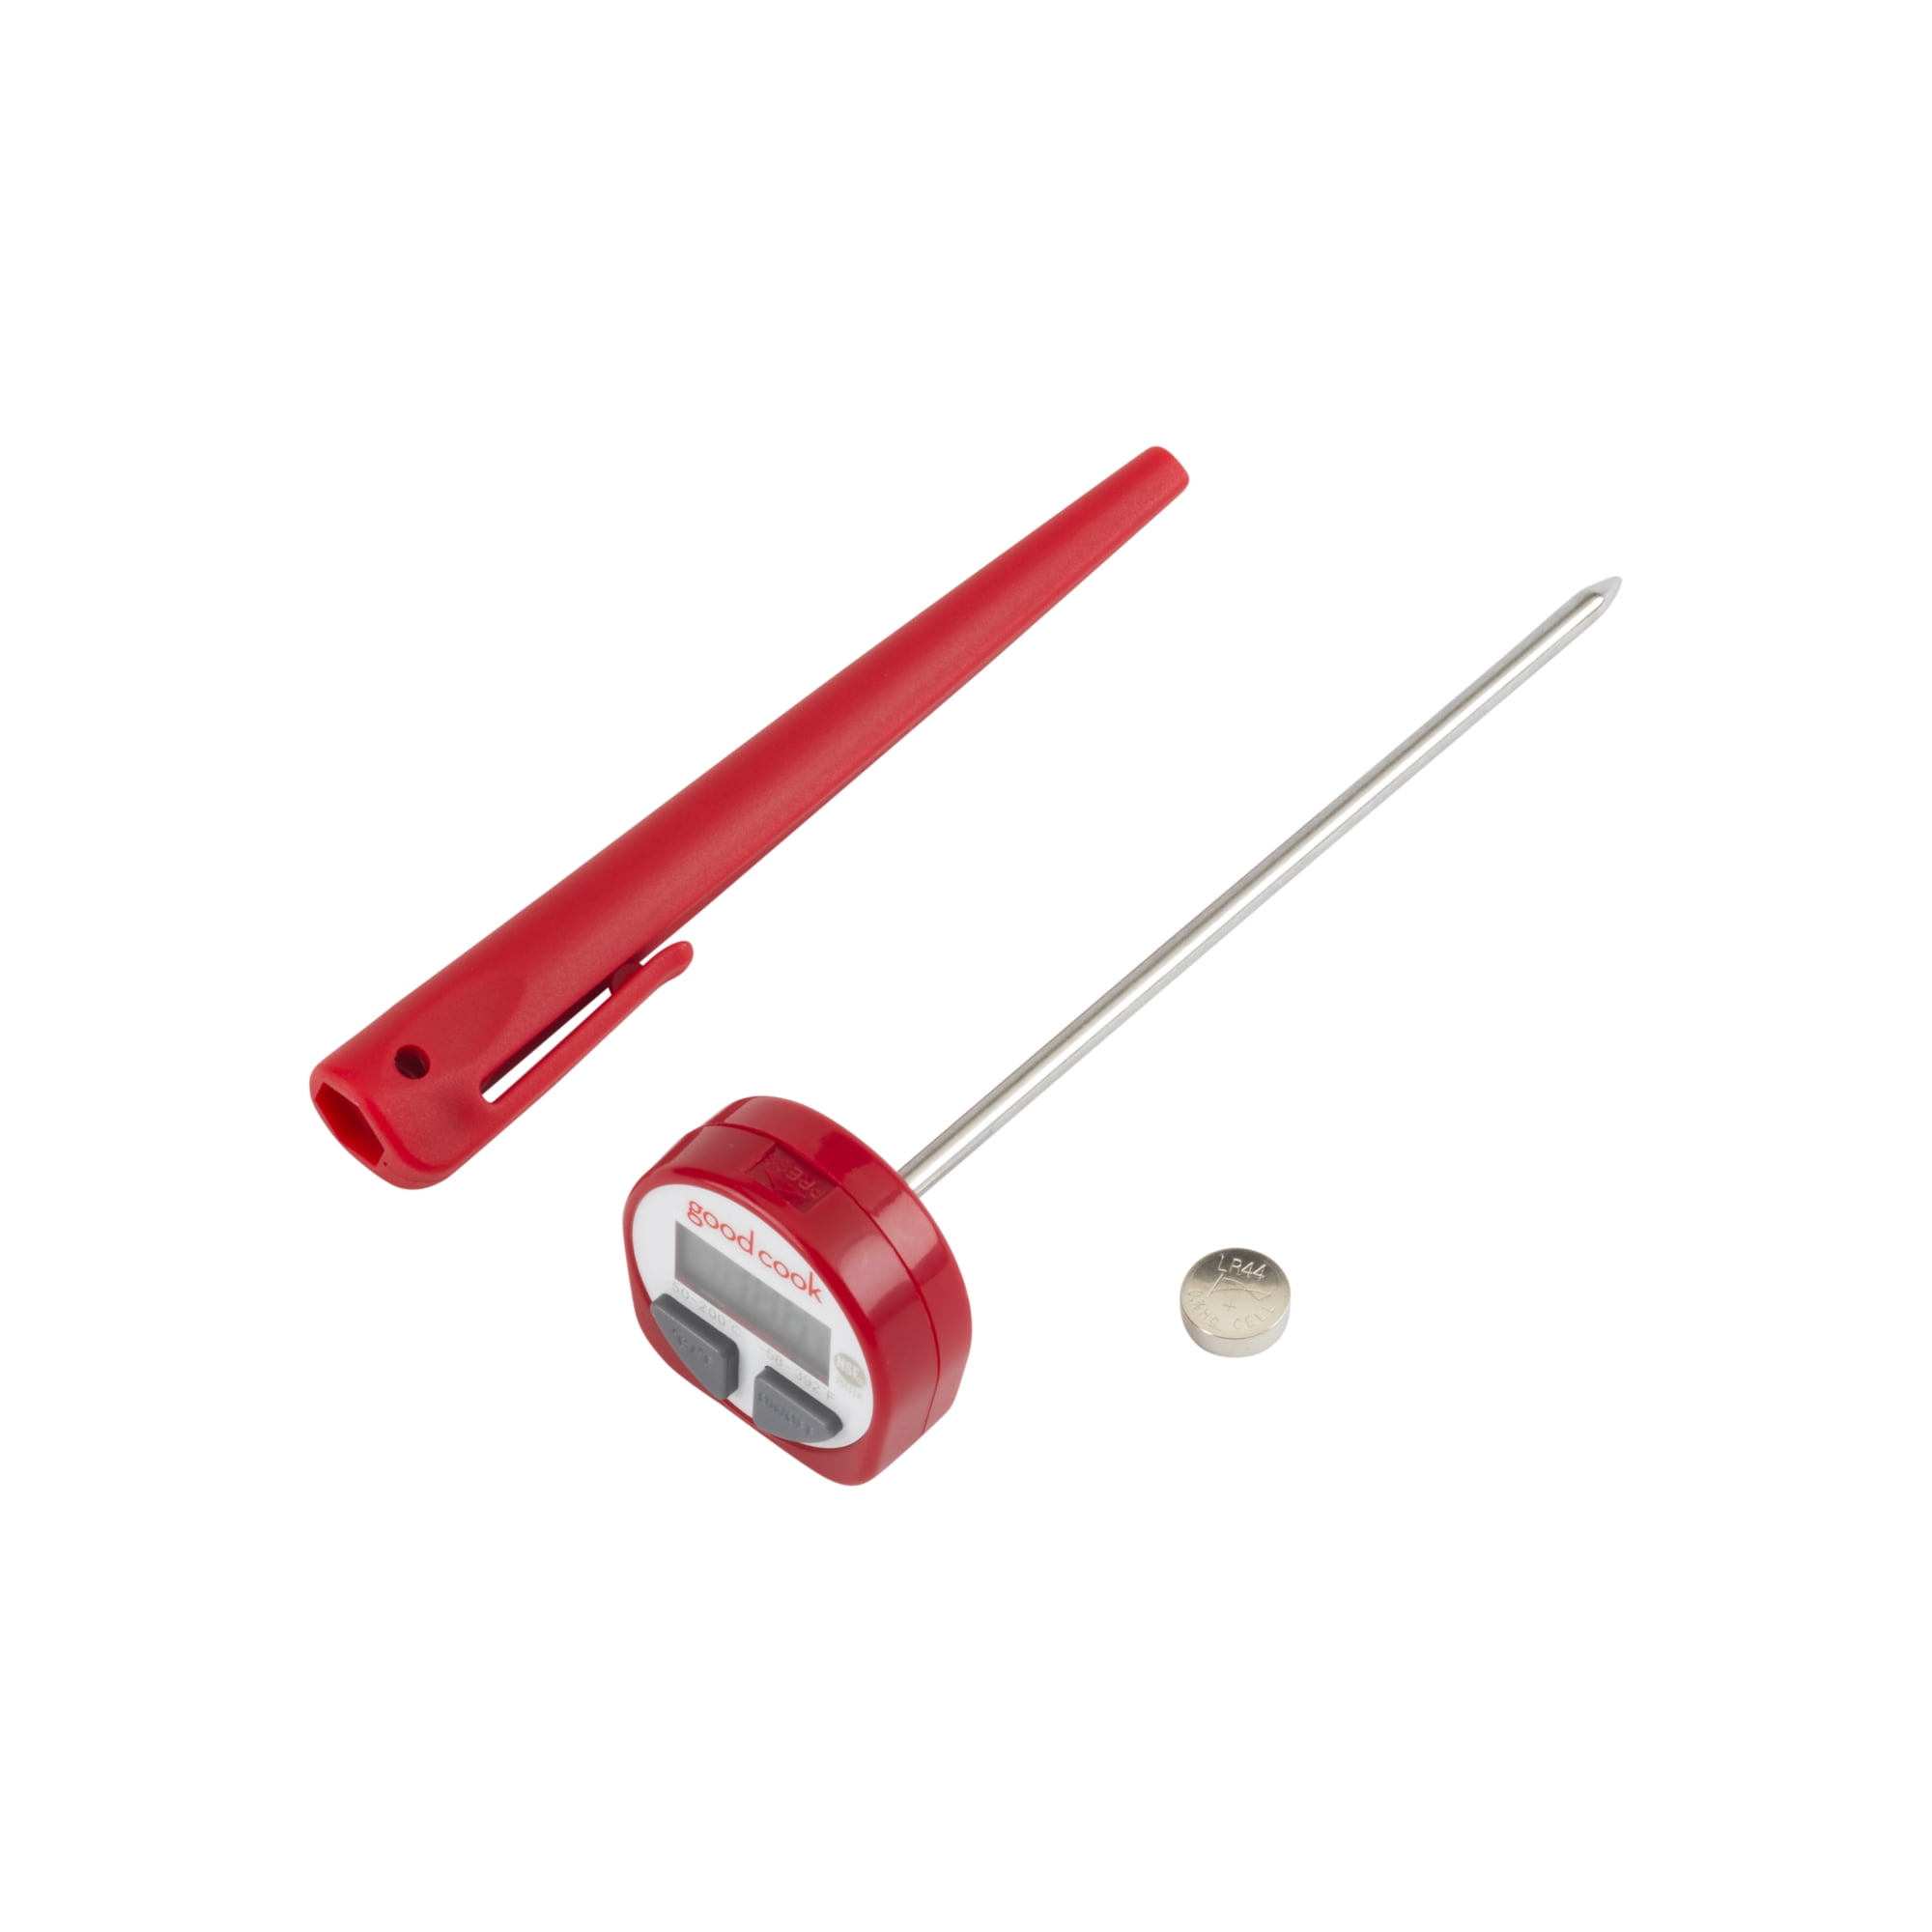  GRASARY Food Thermometer High Accuracy Digital Milk Tea Coffee  Thermometer Practical Red: Home & Kitchen